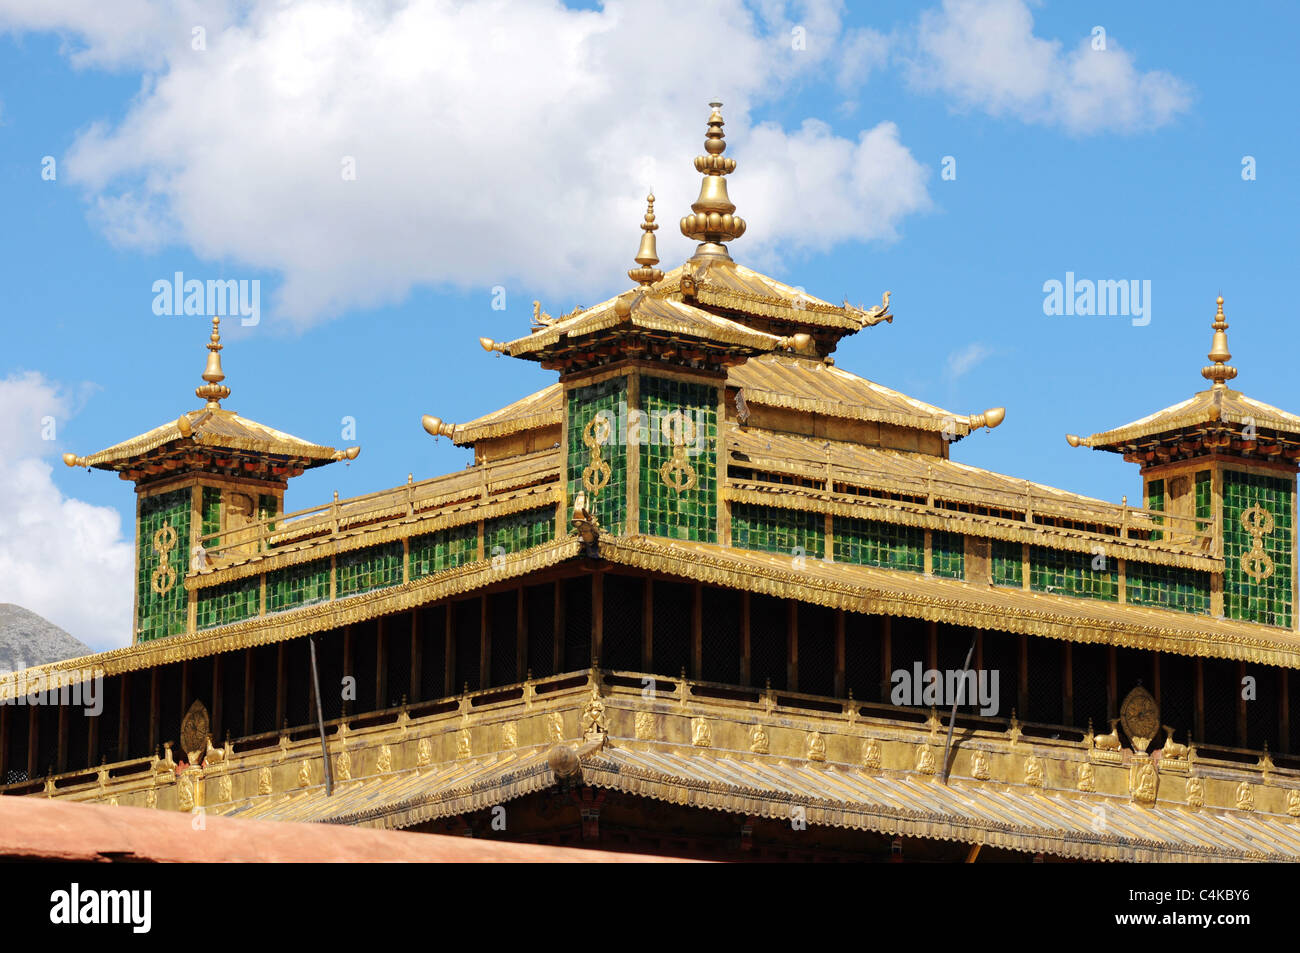 Scenery of a famous lamasery in Tibet. Stock Photo